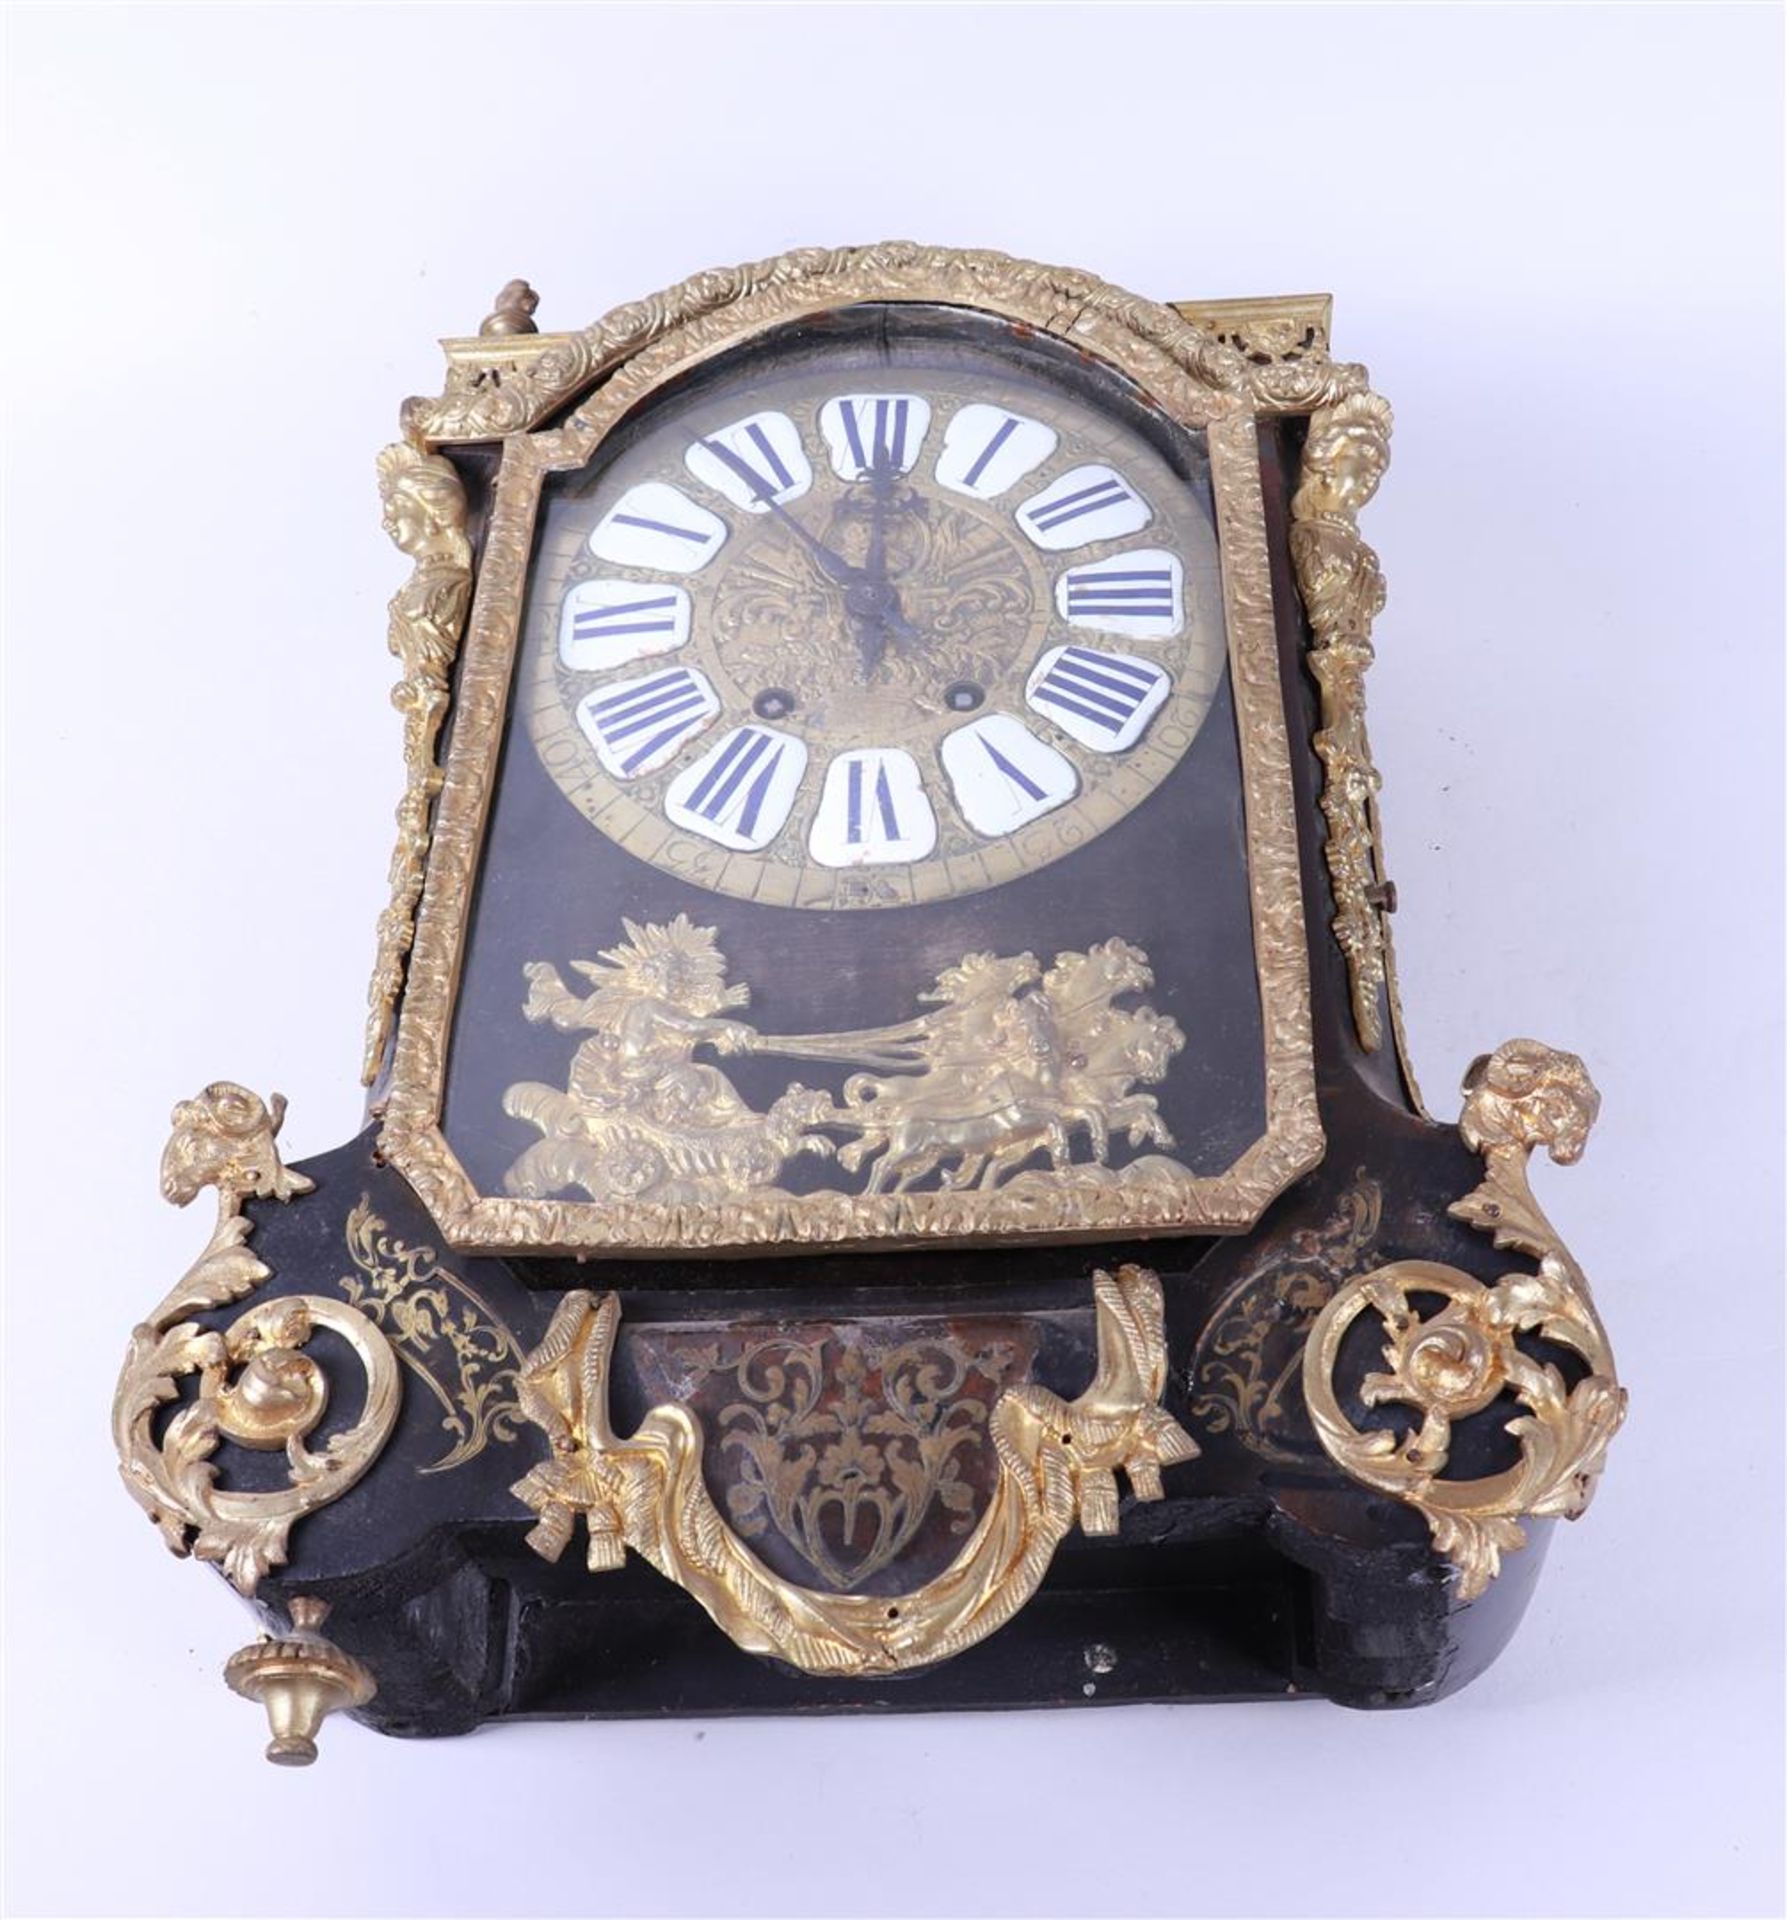 19th Century Table Clock with Copper Frames (Restoration Object, Parts Shortage) - Image 4 of 5